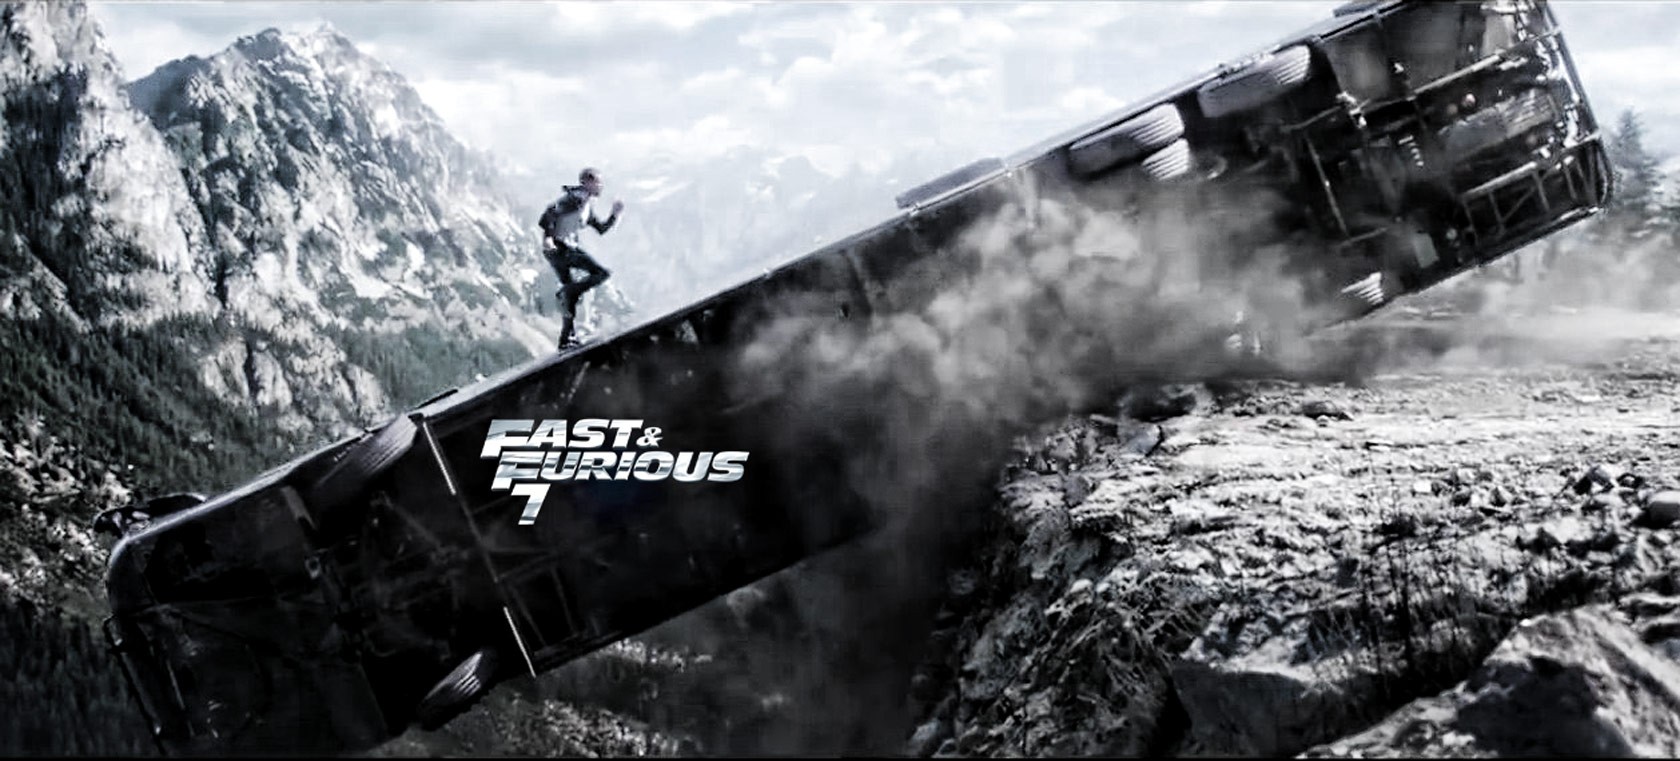 Fast And Furious Movie Action Trailer HD